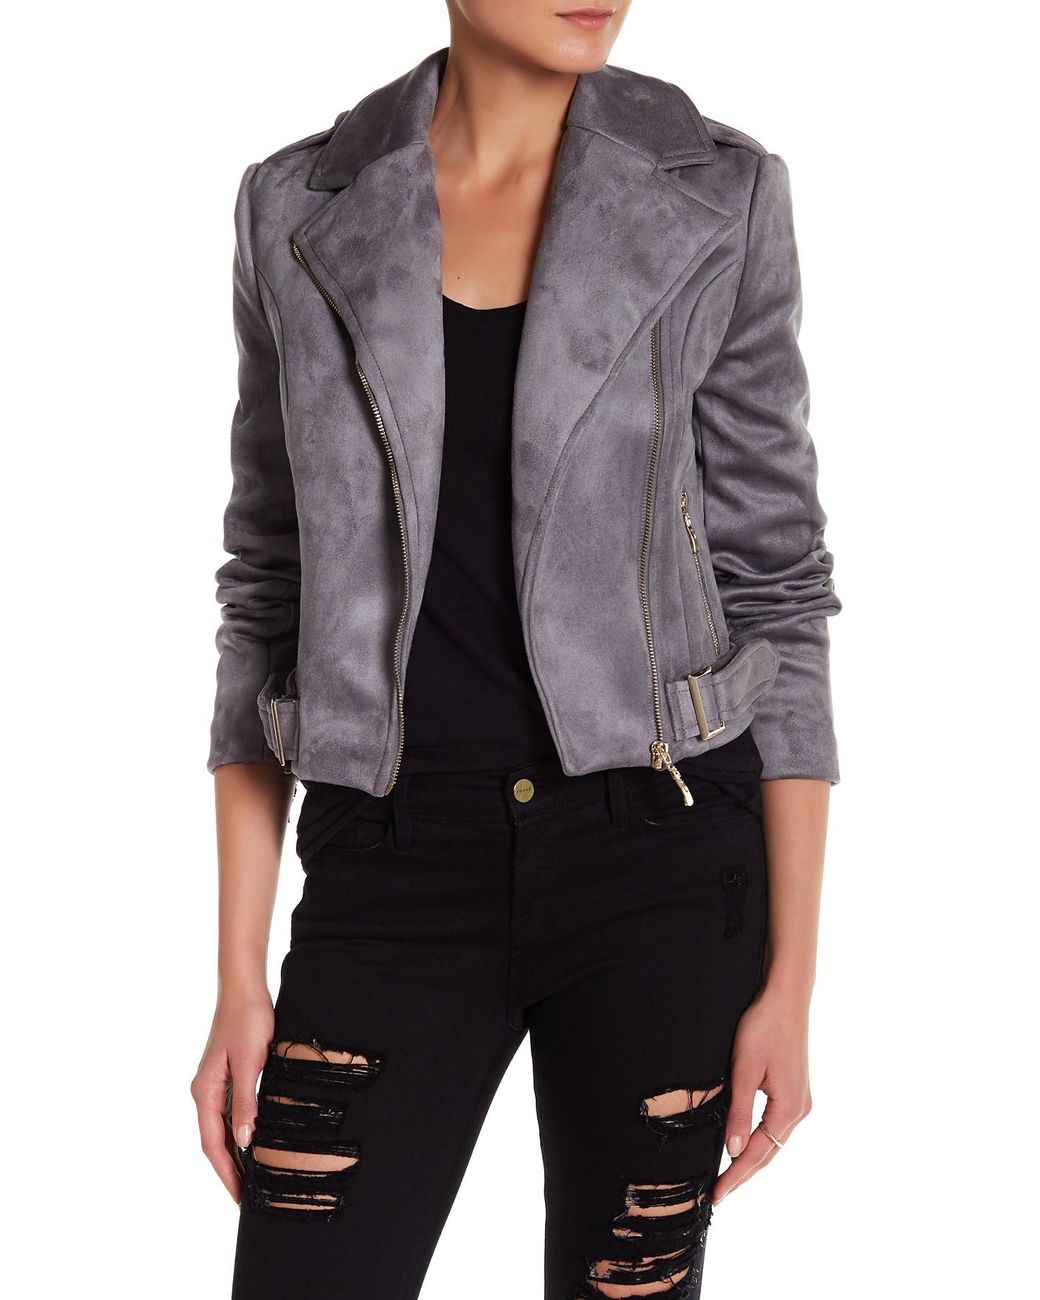 NWT Romeo & Juliet Couture Suede Jacket - www.vitorcorrea.com